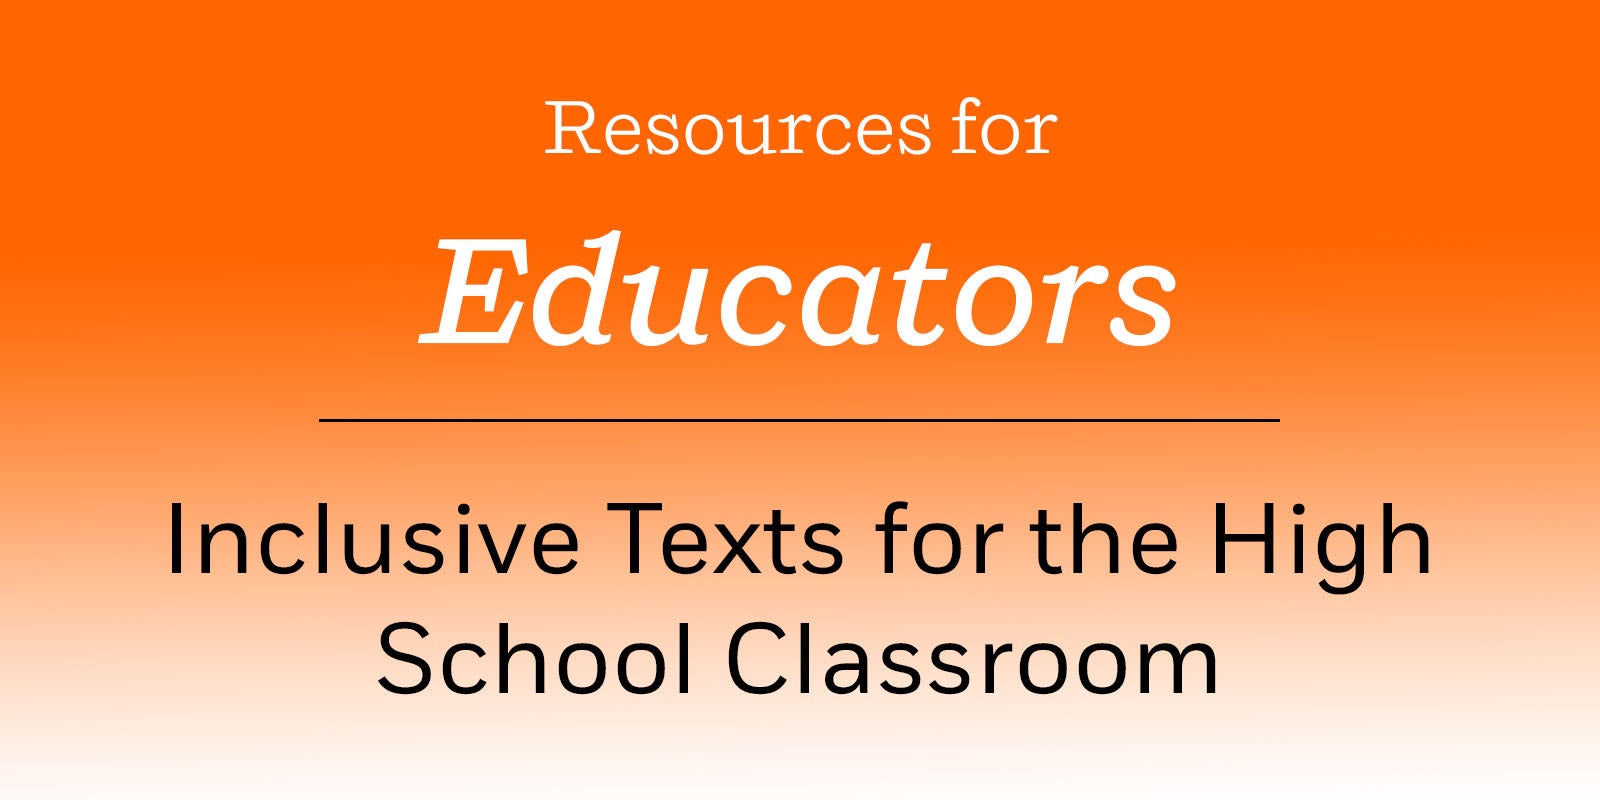 Inclusive Texts for the High School Classroom